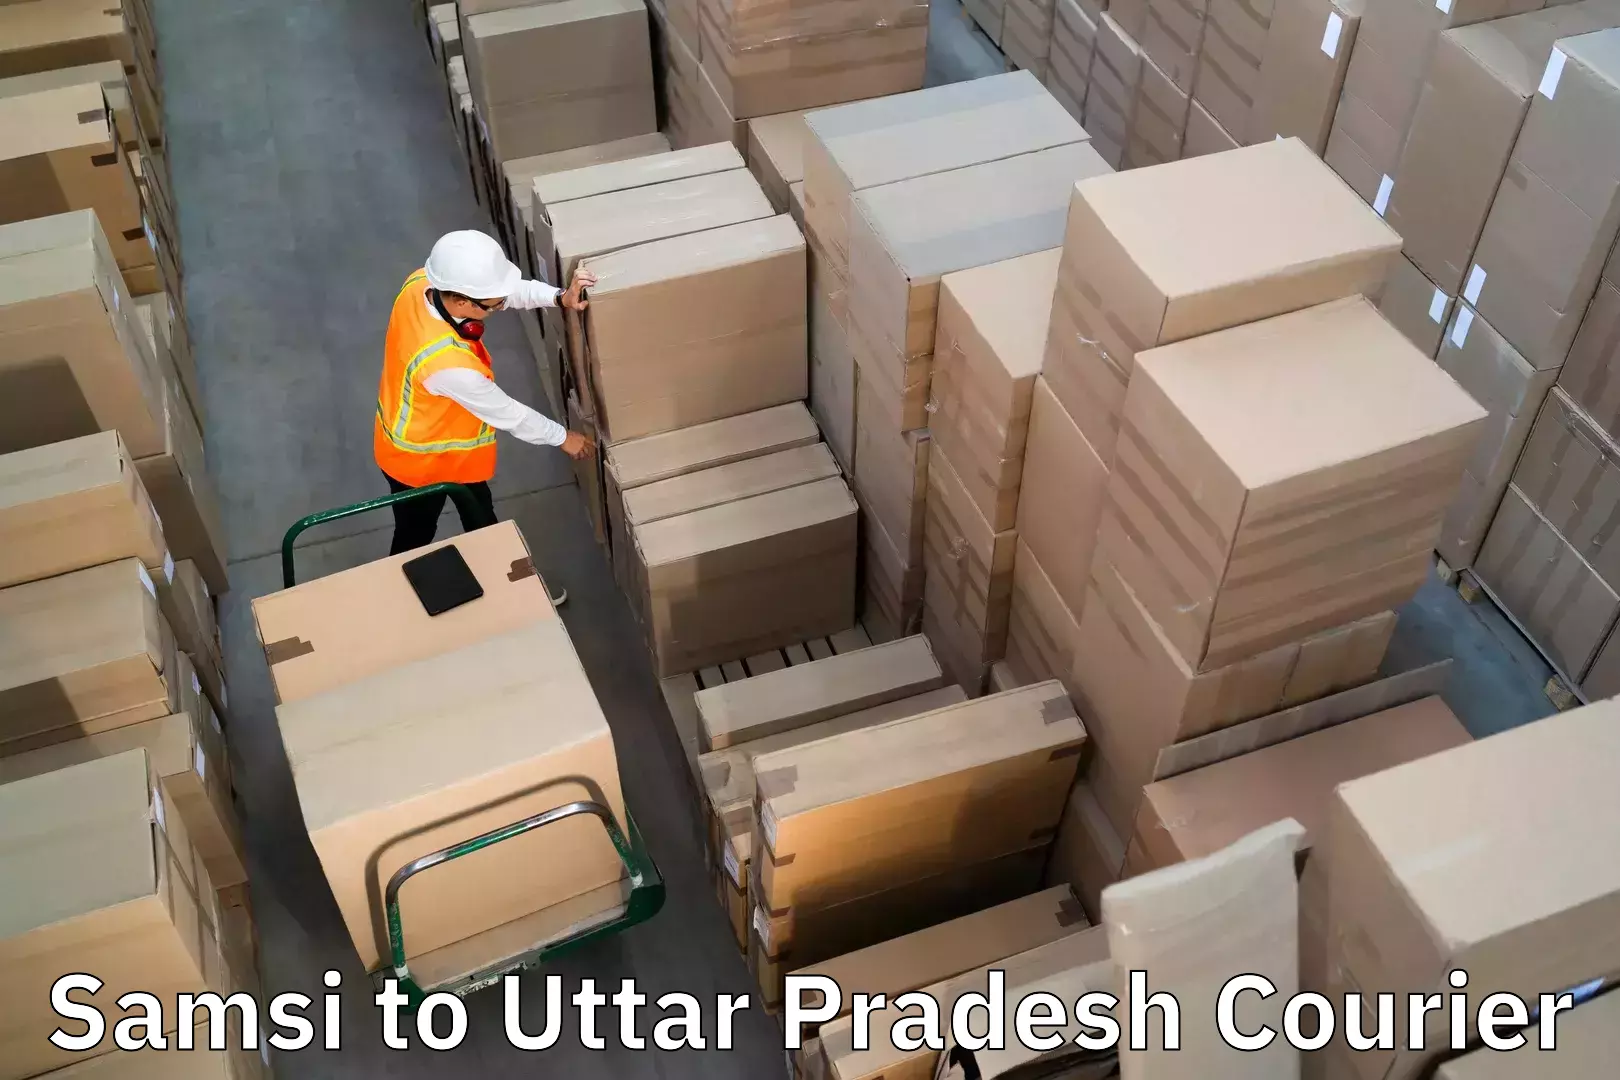 Urgent luggage shipment in Samsi to Sultanpur